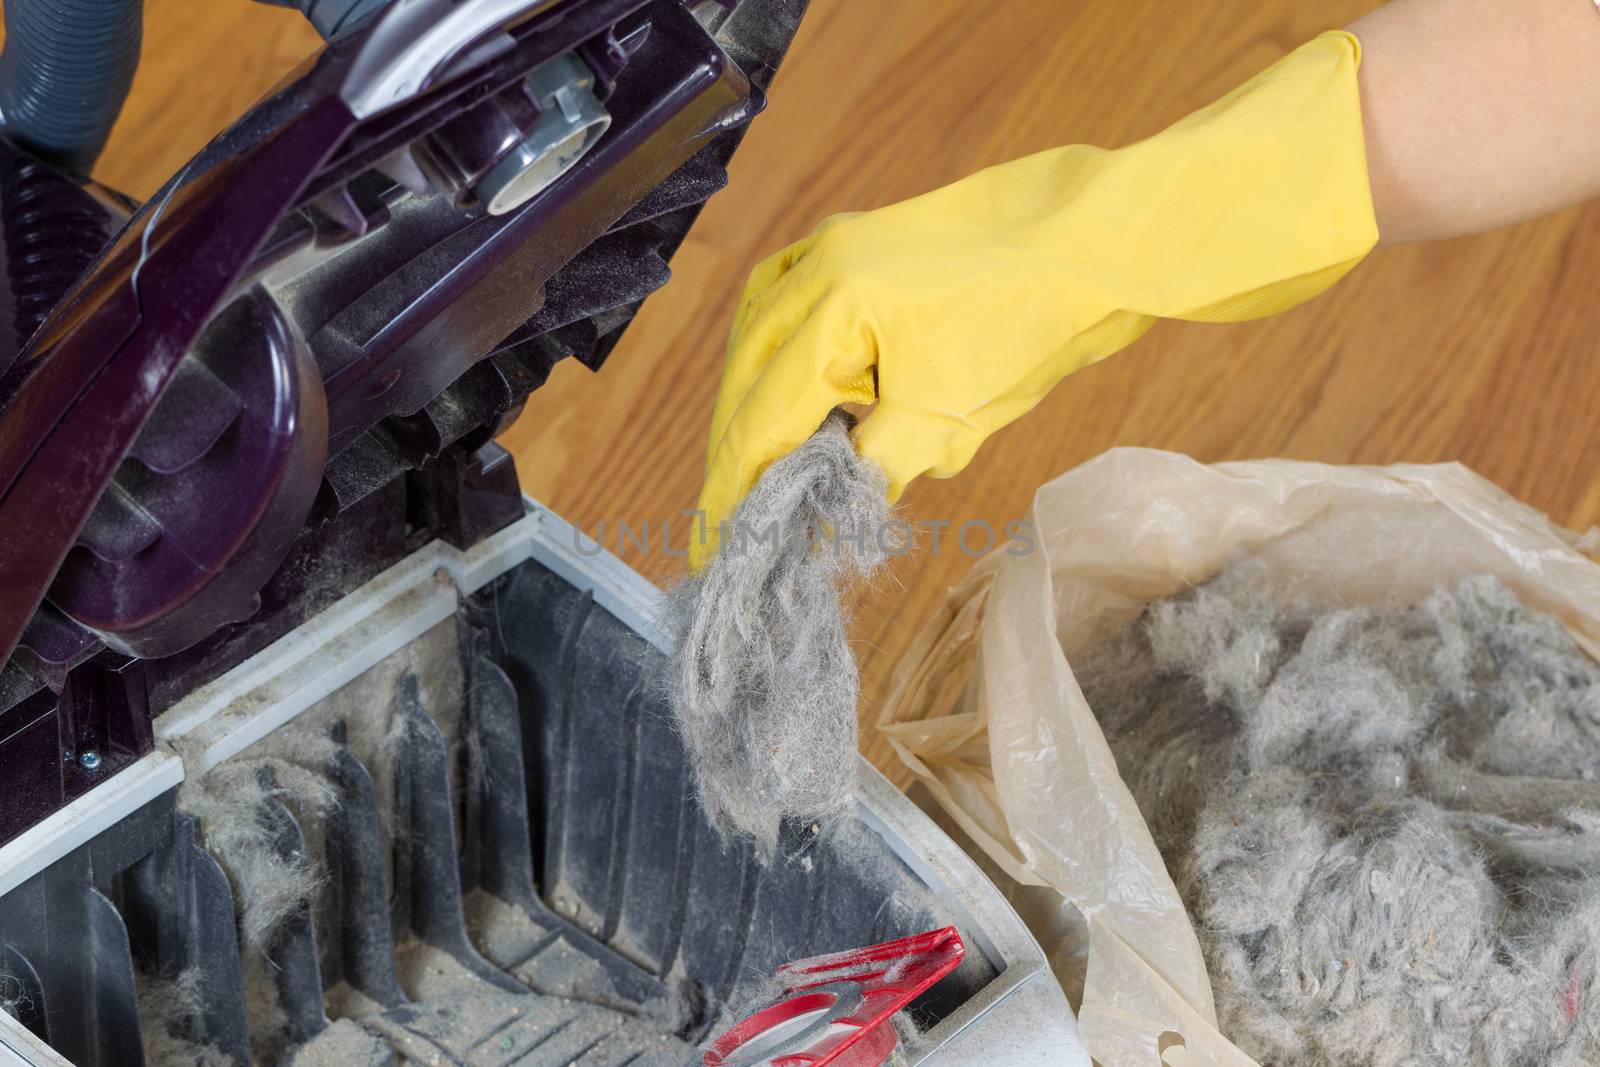 Emptying Vacuum Cleaner into Plastic Bag  by tab1962